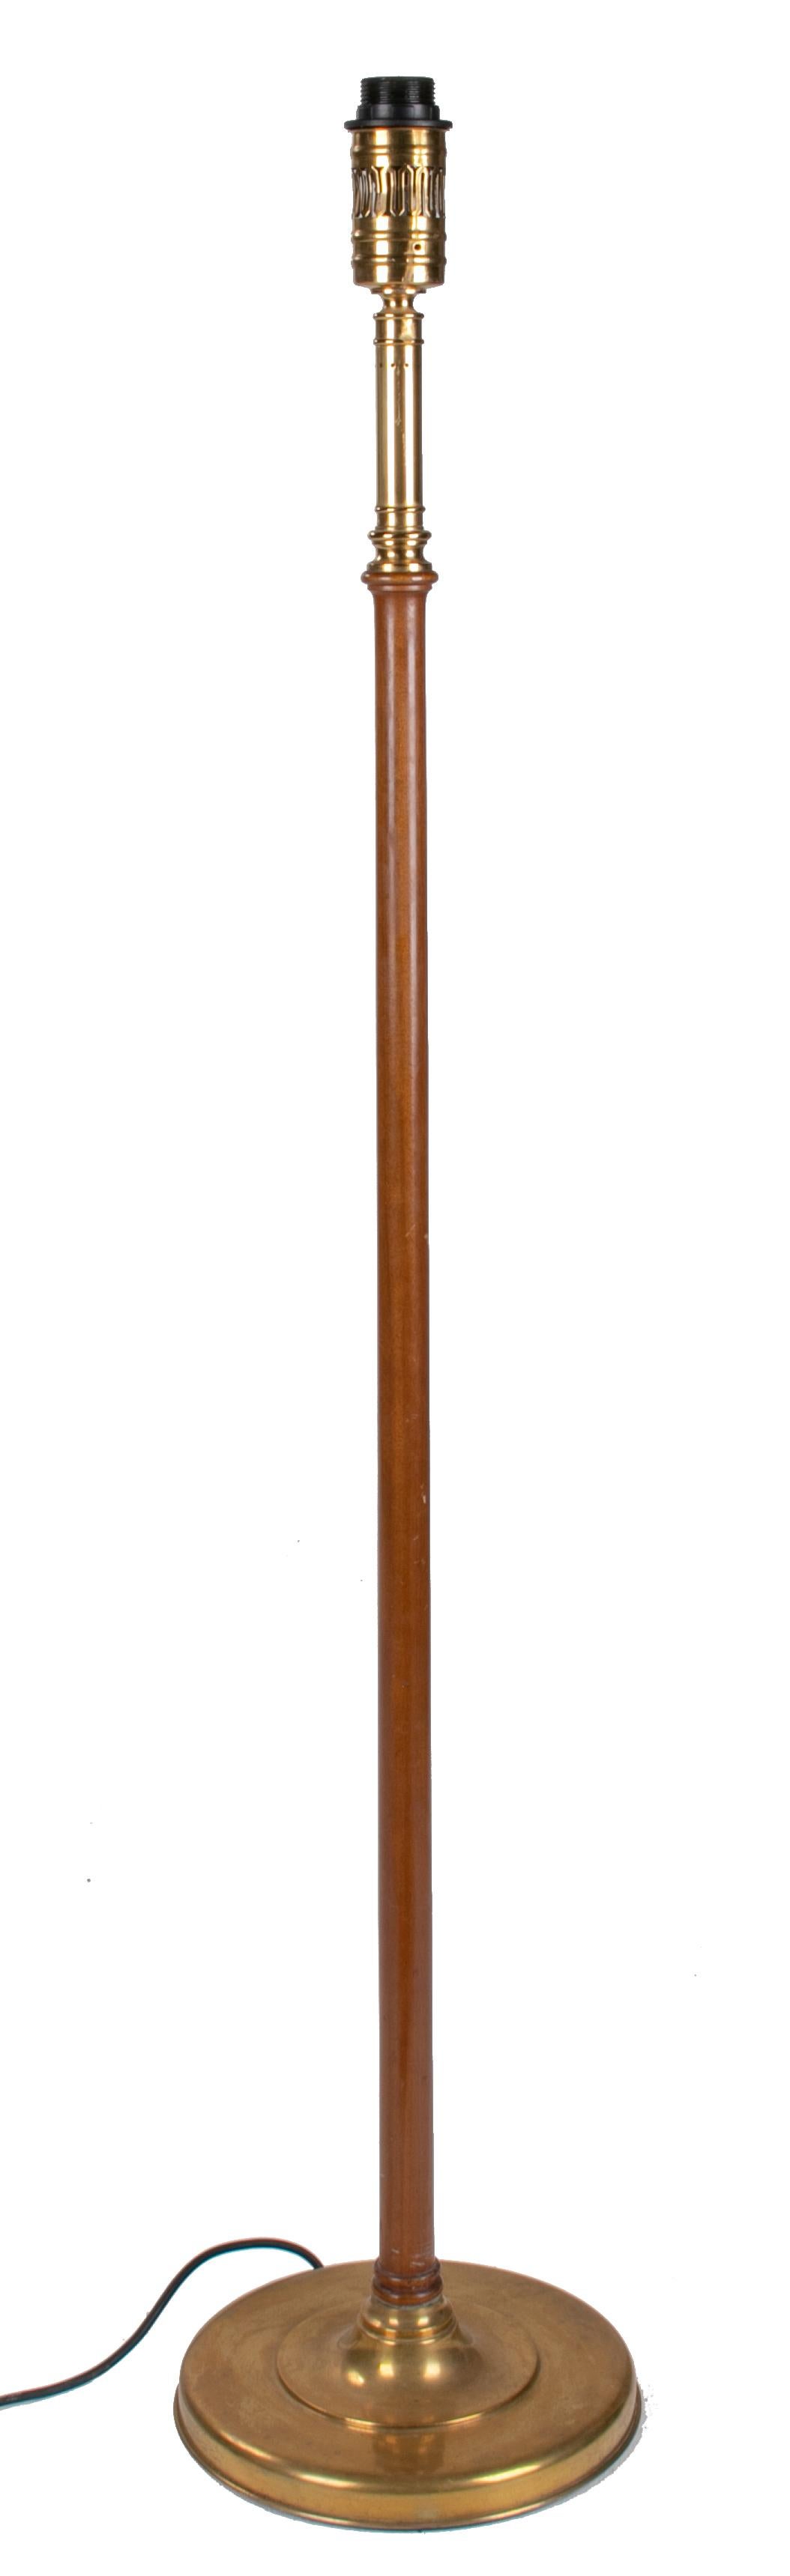 1990s Spanish wood and metal standing lamp.